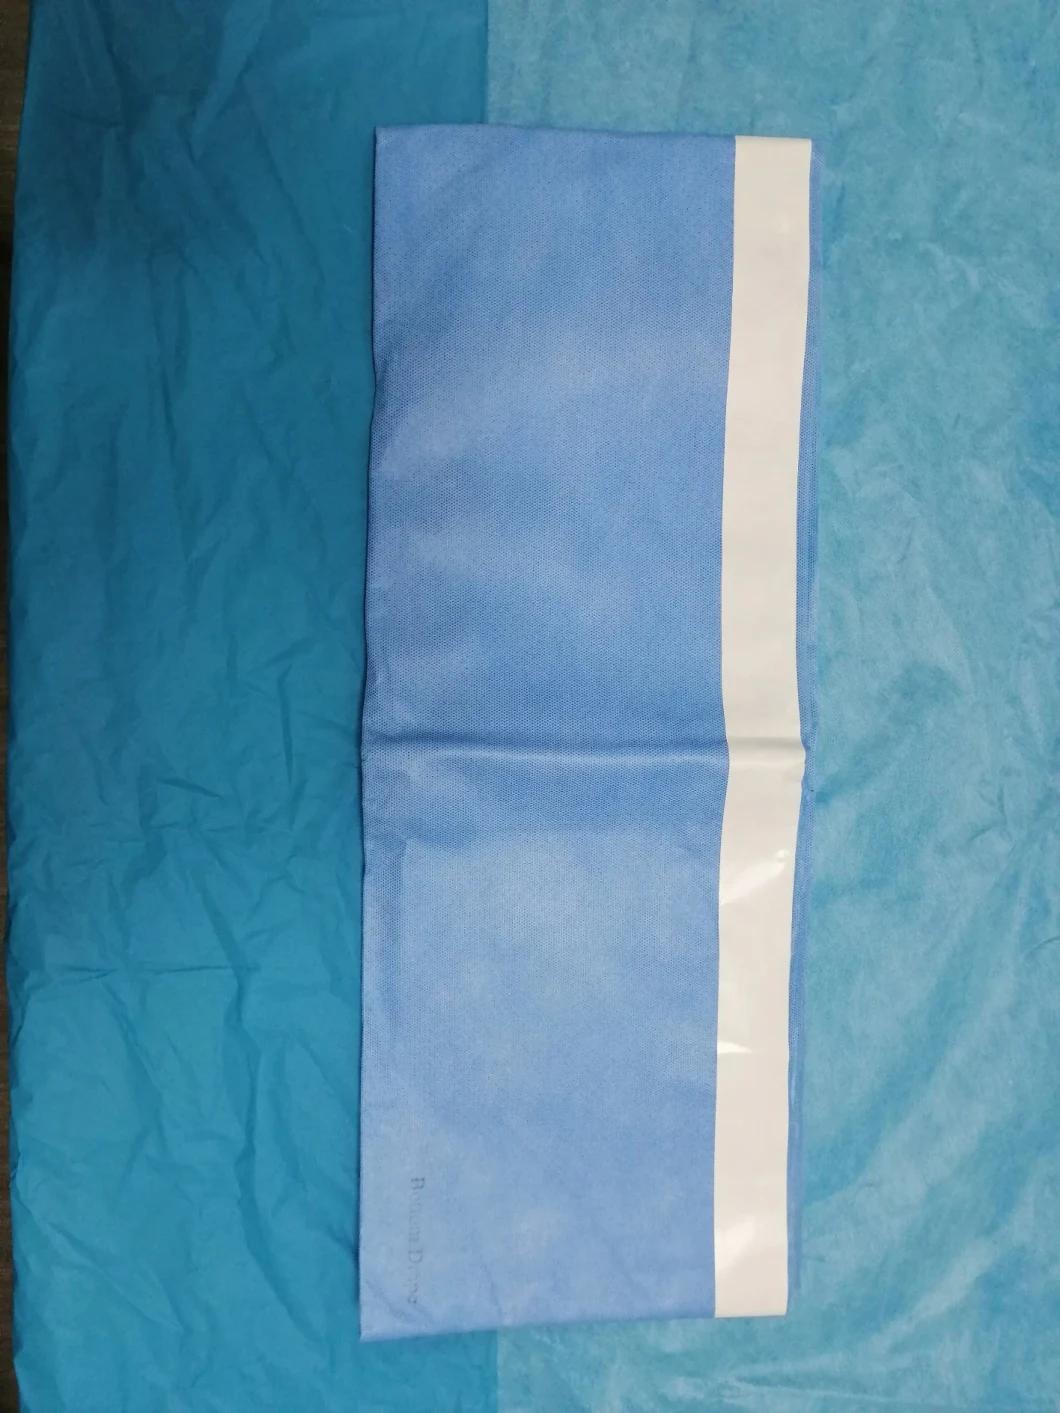 2021 Hot Good Quality Disposable Ioban Surgical Drape Pack